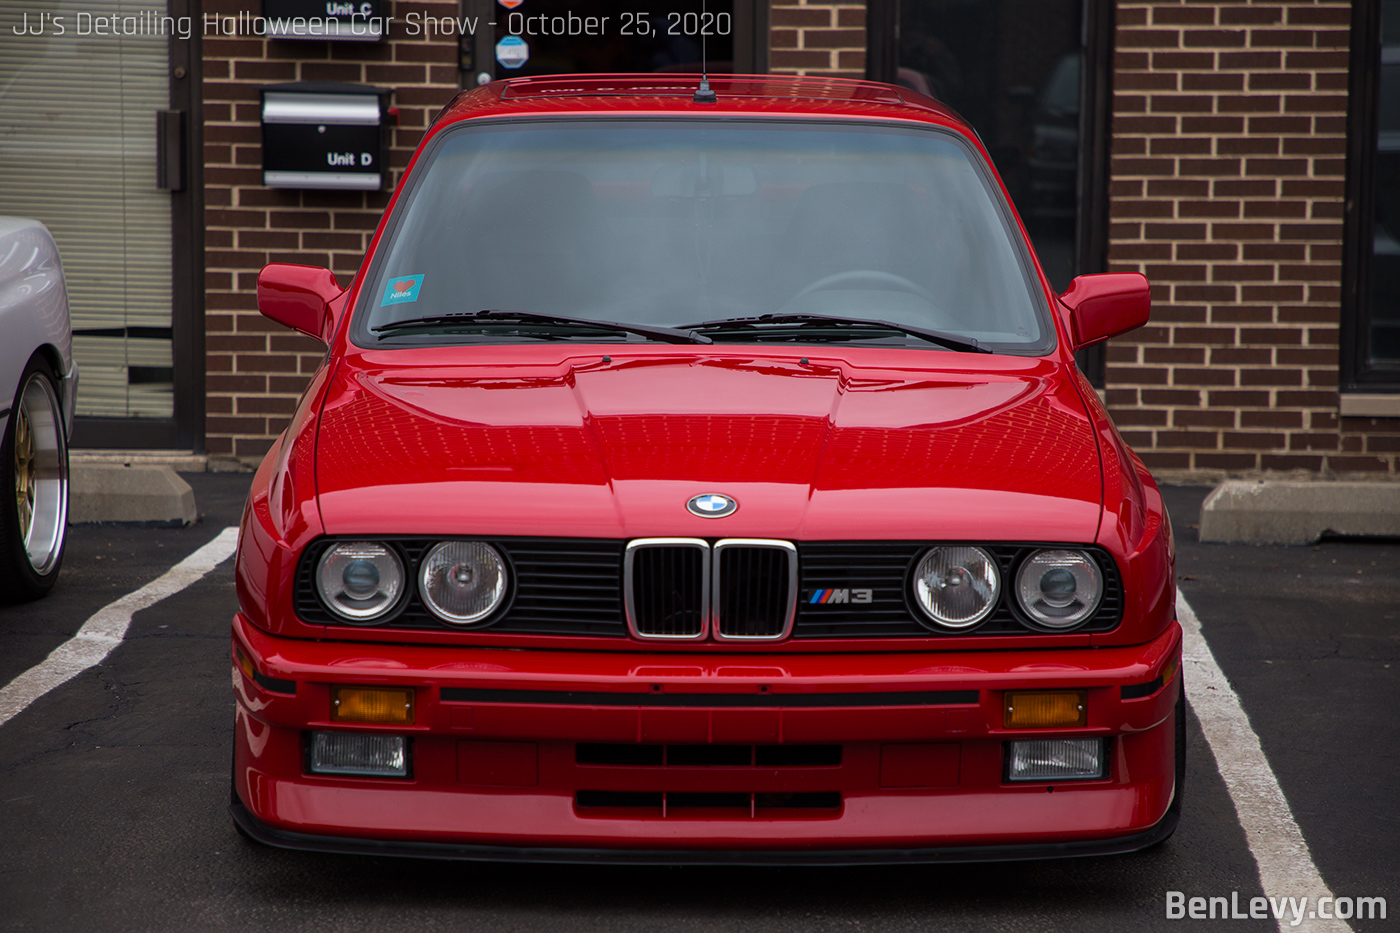 Front view of E30 BMW M3